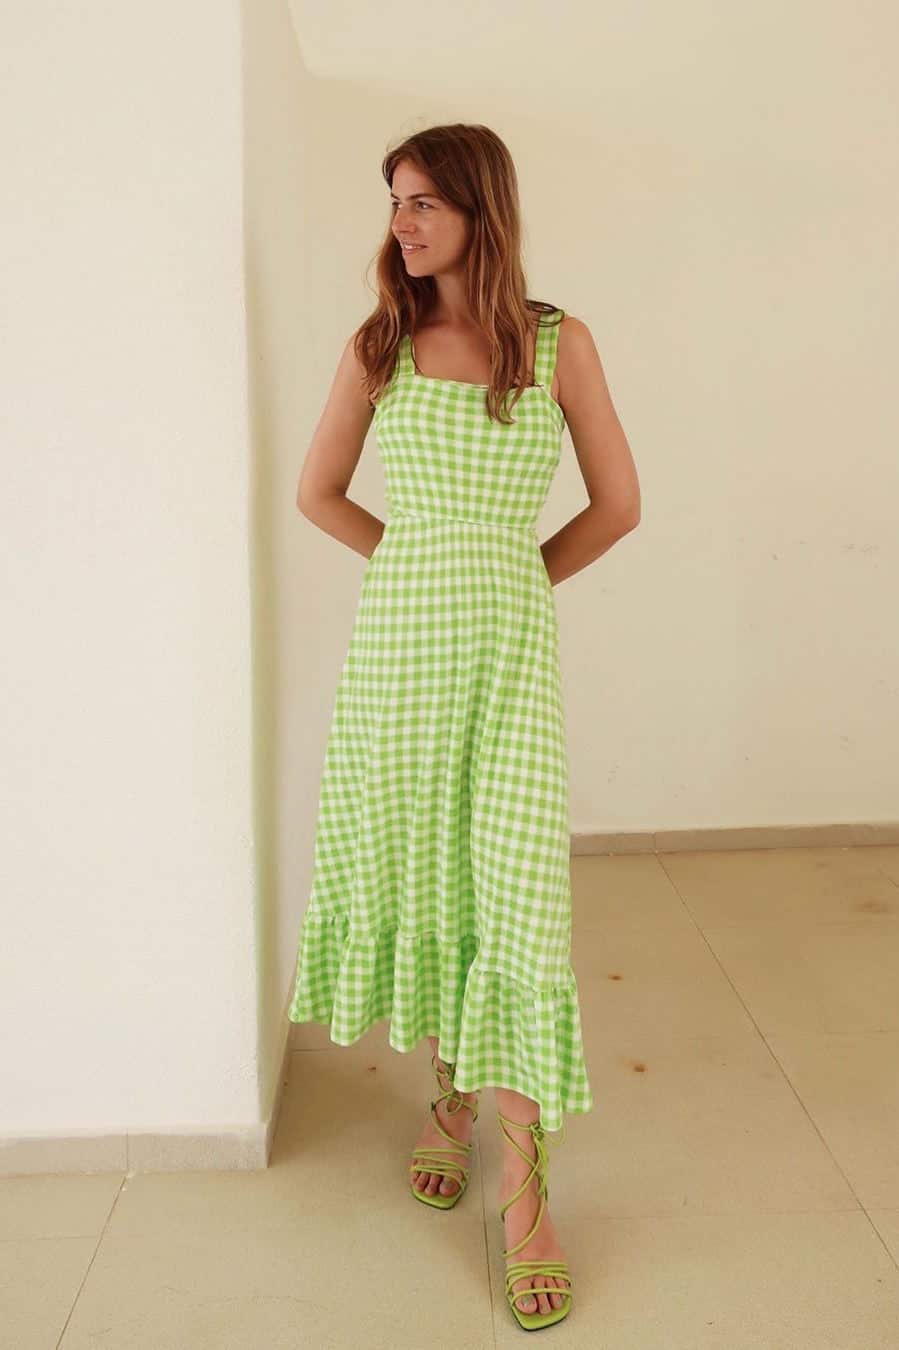 Green and Gingham wear